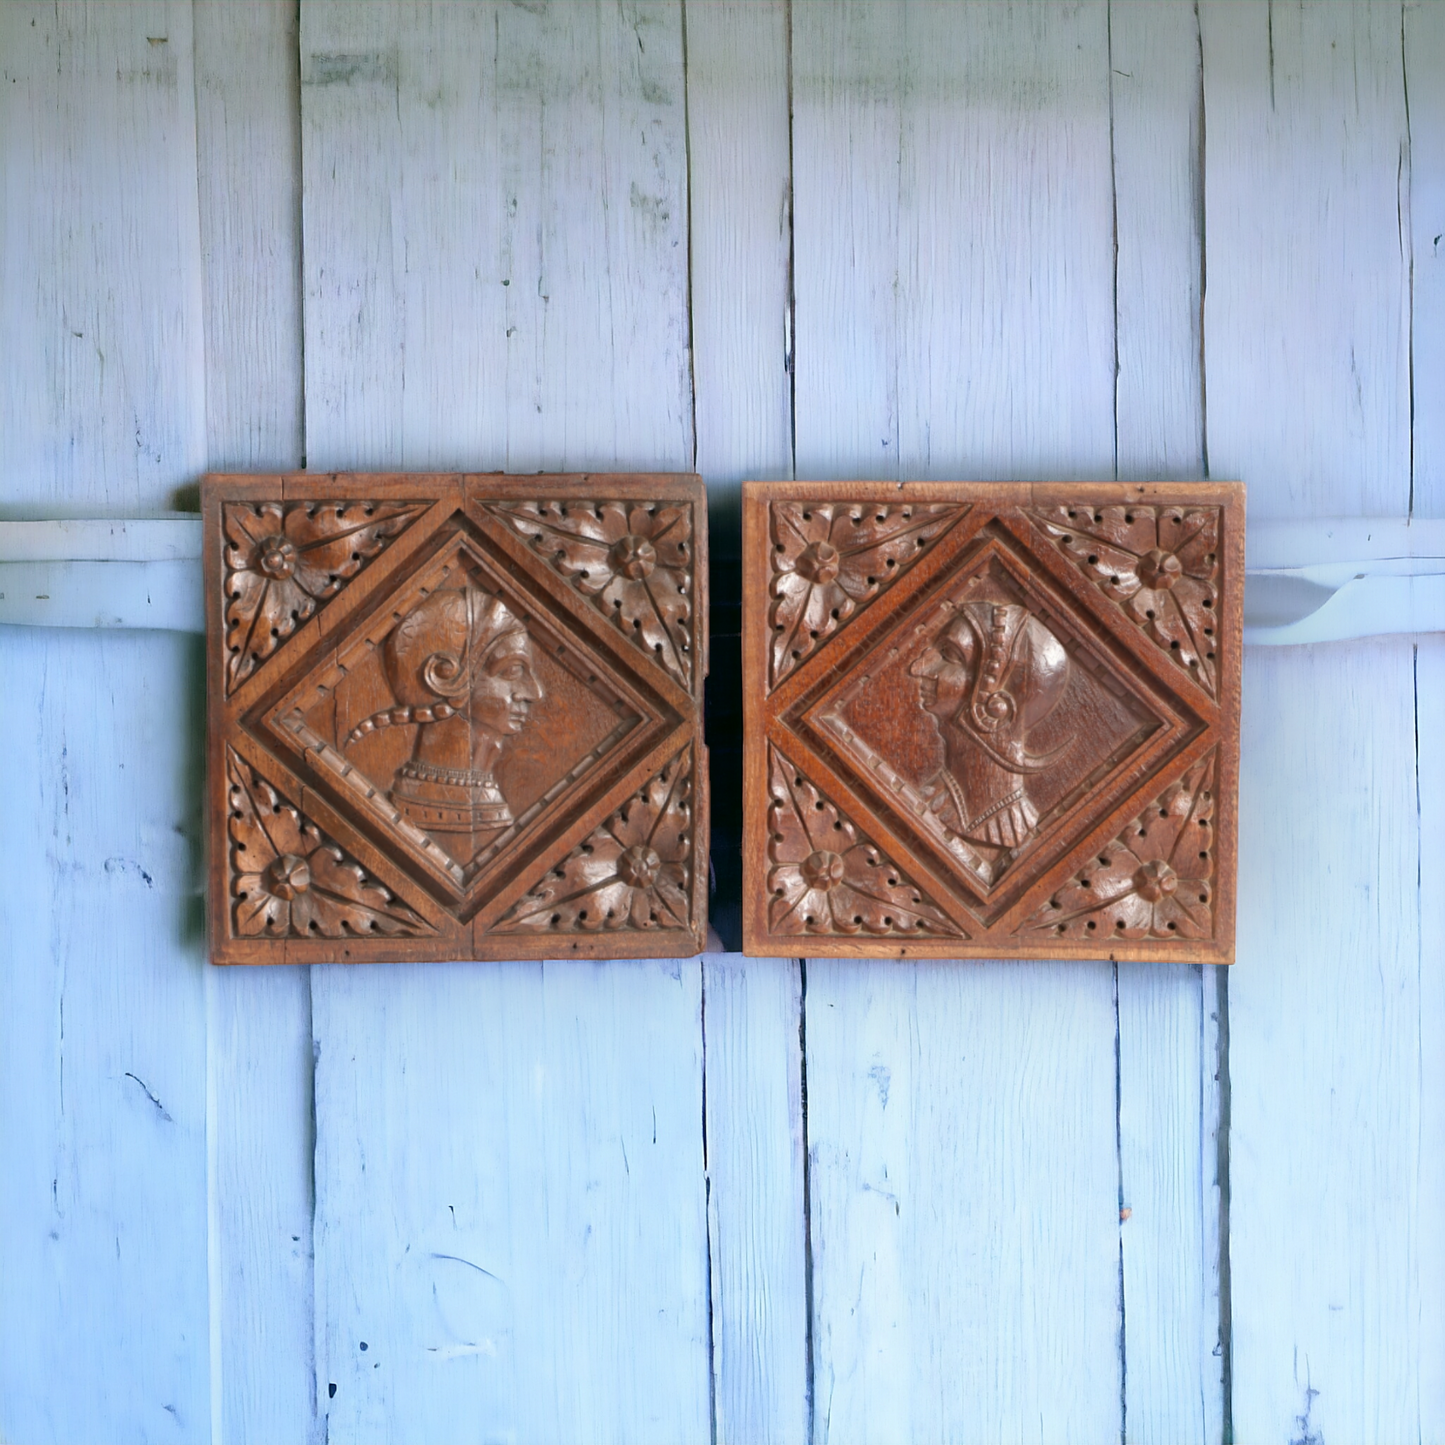 A Pair of 16th Century, Henry VIII Period, English Antique Carved Oak Romayne-Type Portrait Panels, circa 1530